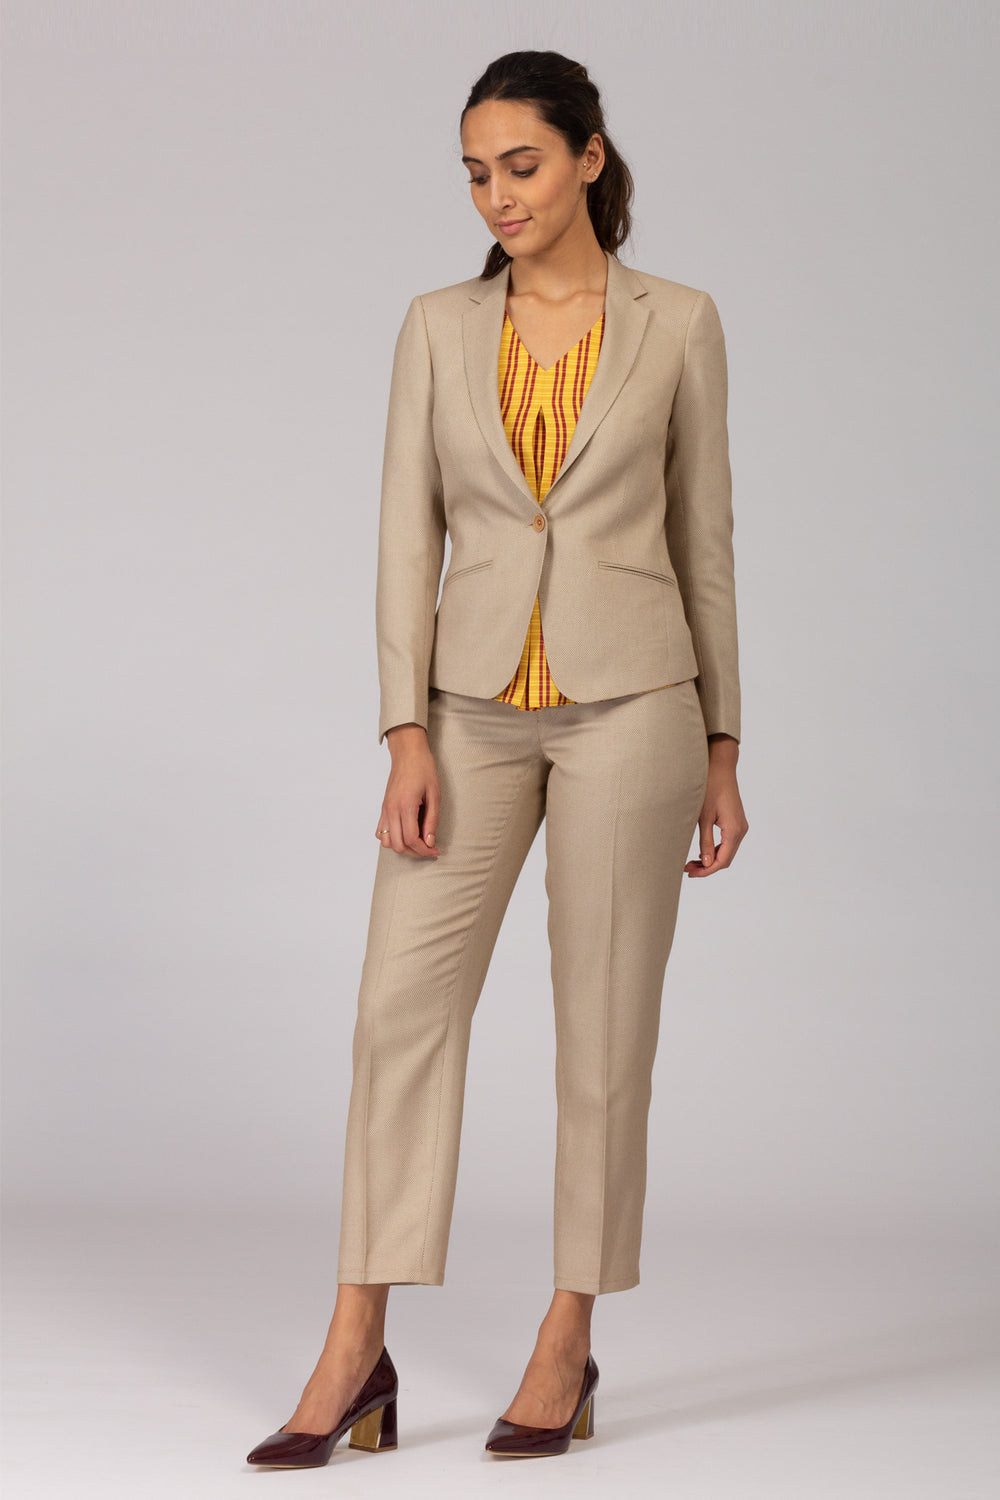 Buy online Best Quality Party Wear Pant Suit from western wear for Women by  Sunrise Collection for 2629 at 27 off  2023 Limeroadcom